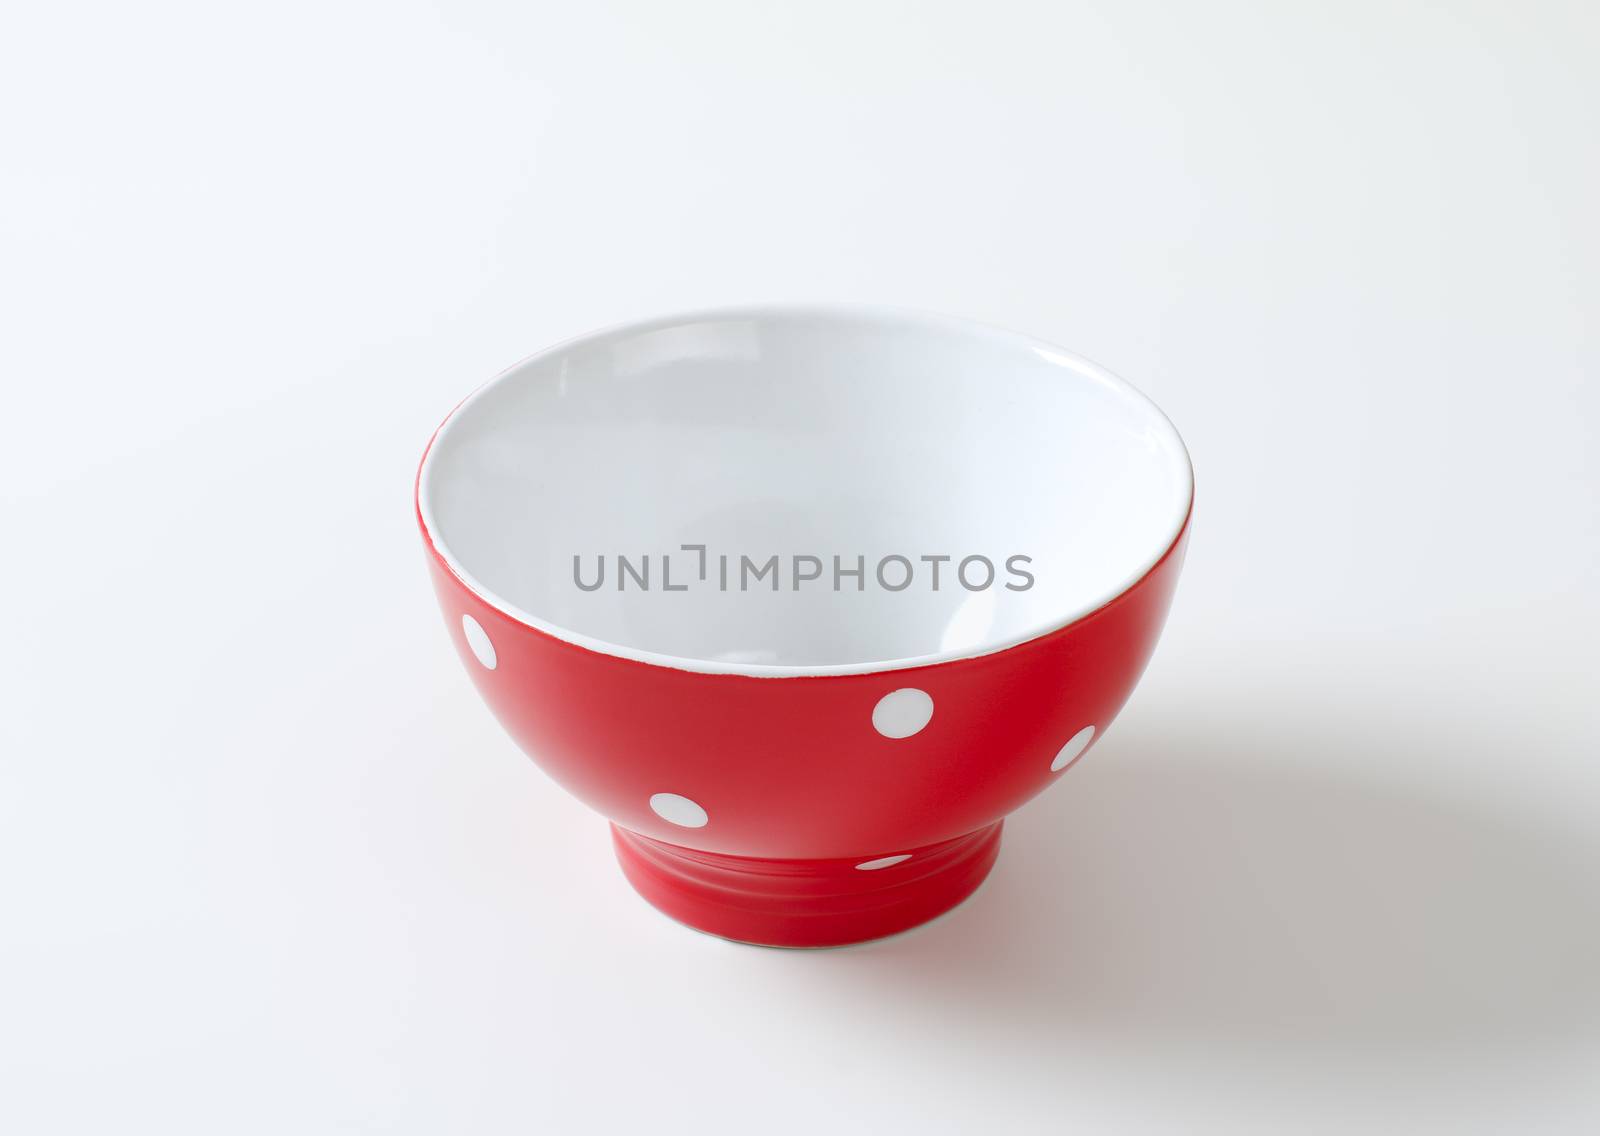 Empty red and white polka dot bowl by Digifoodstock